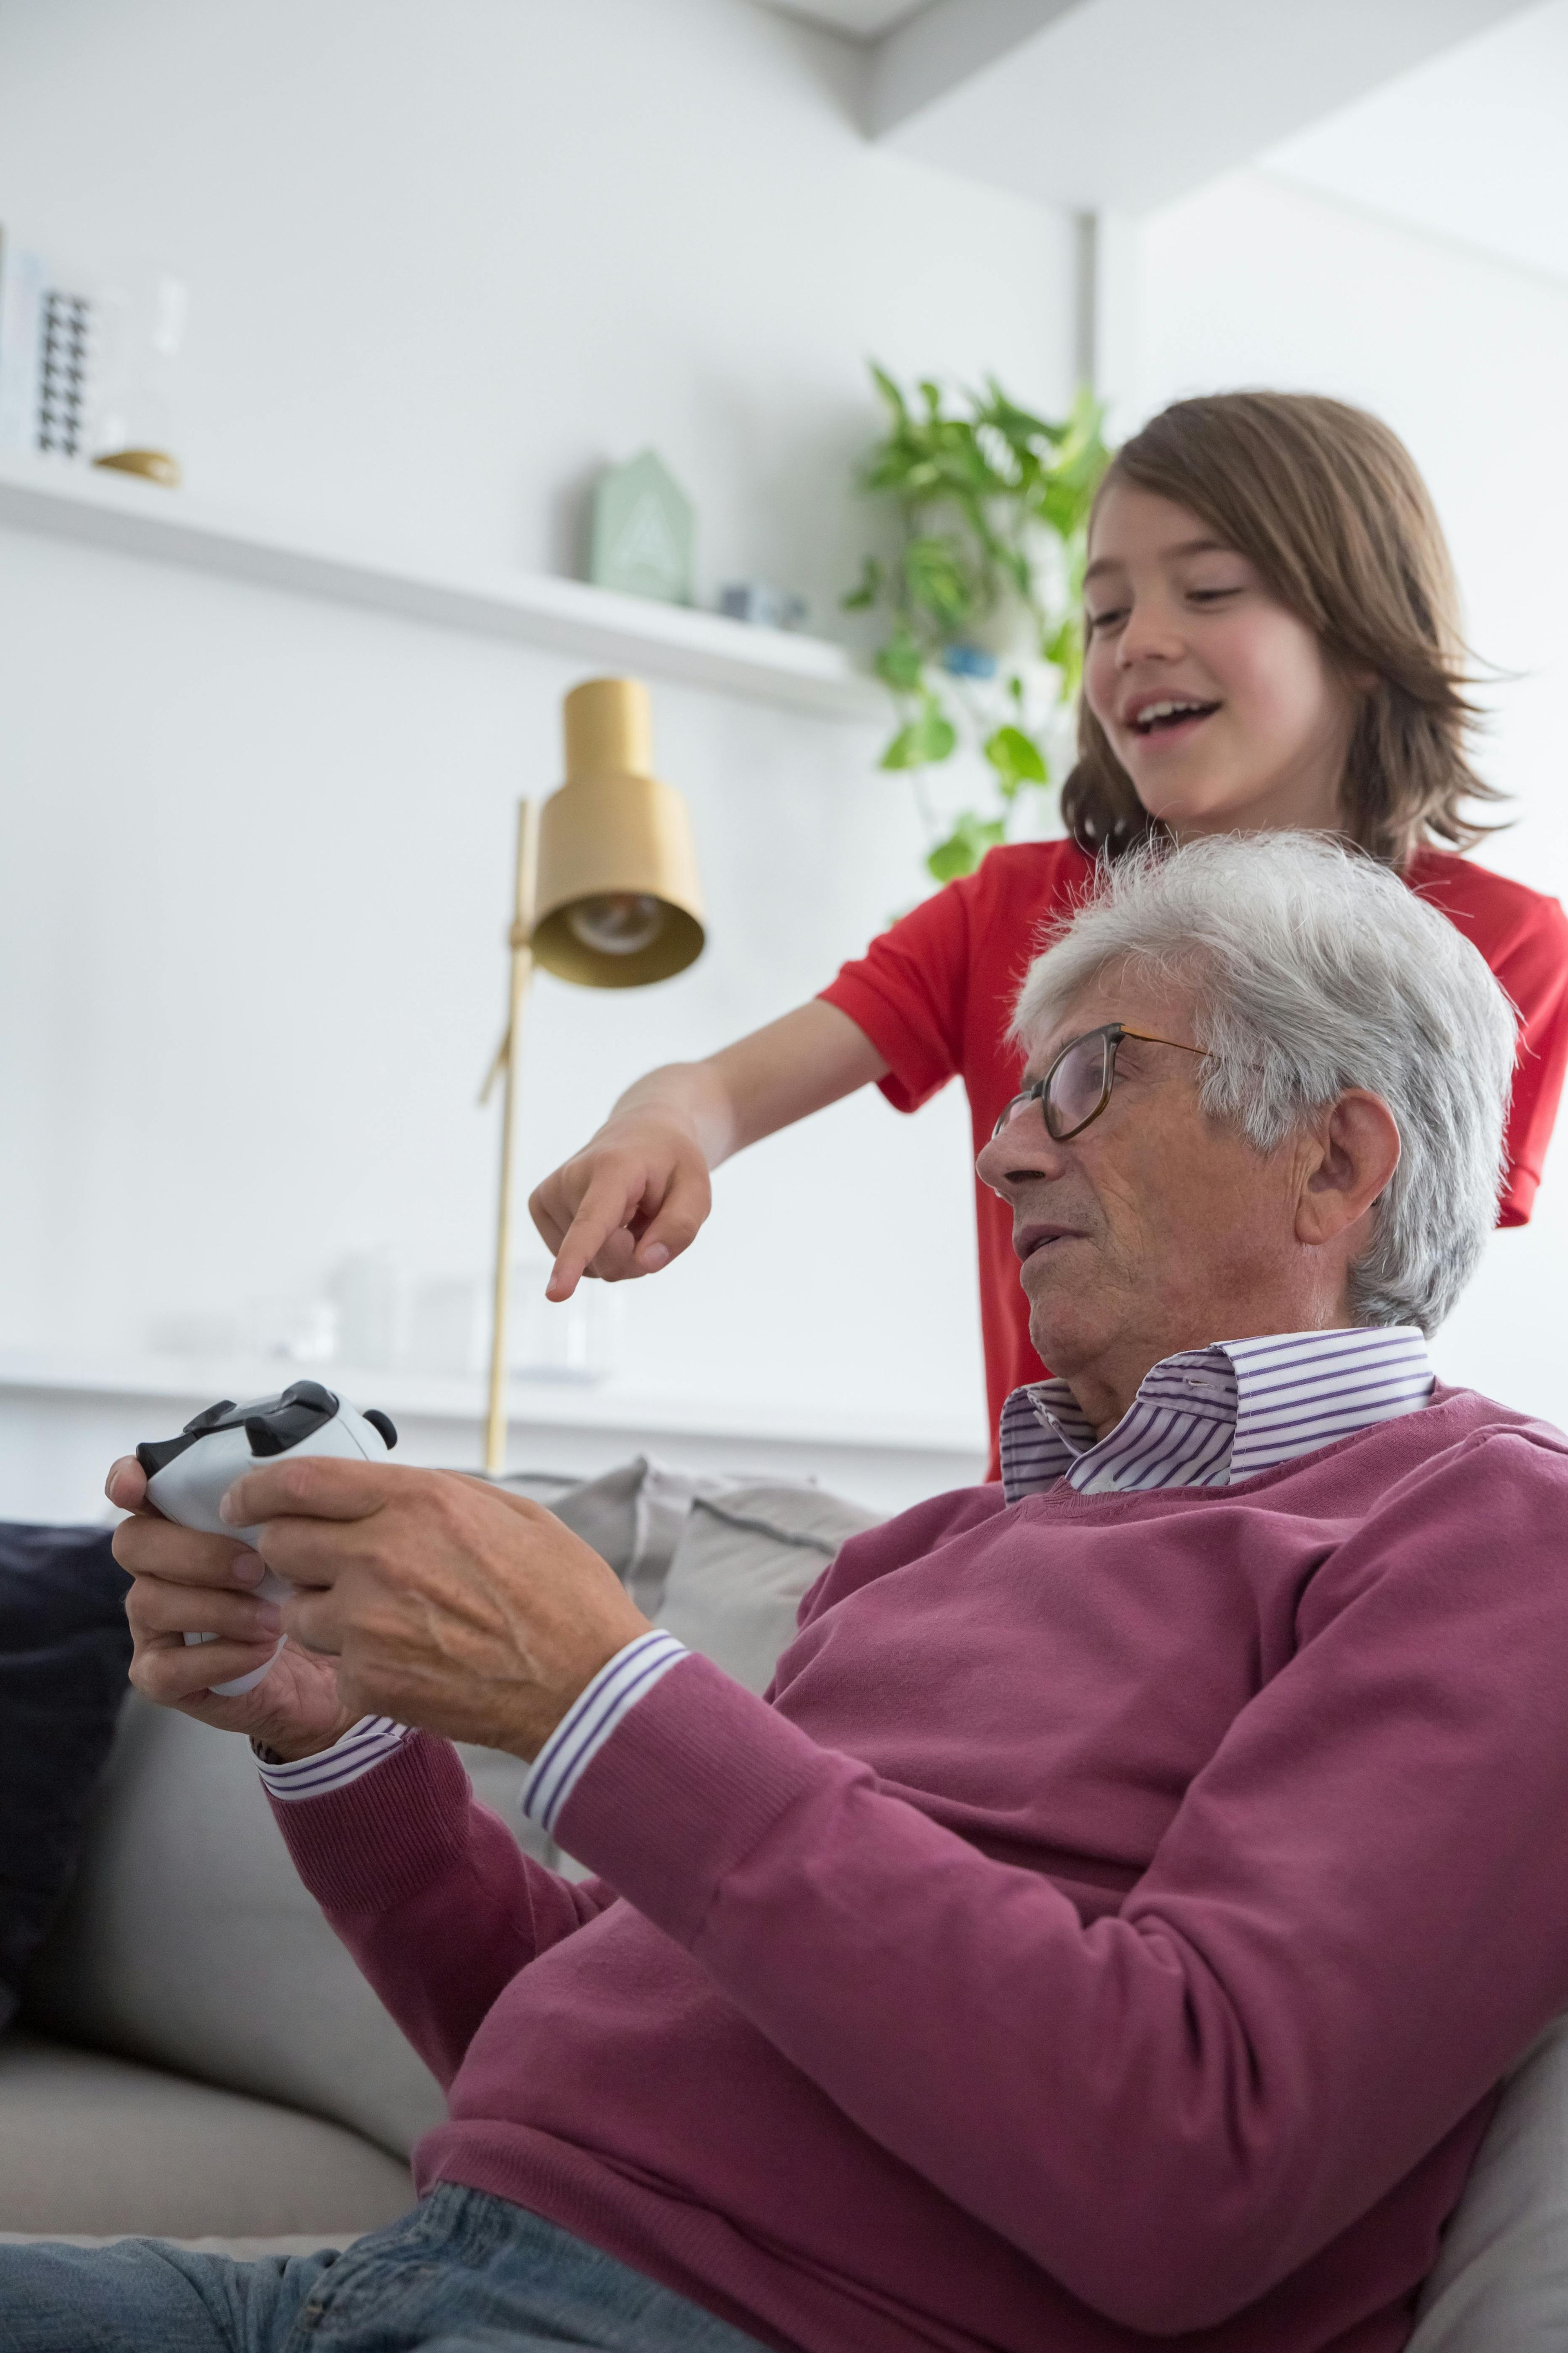 Ways to show your adult child you want to be a good grandparent.